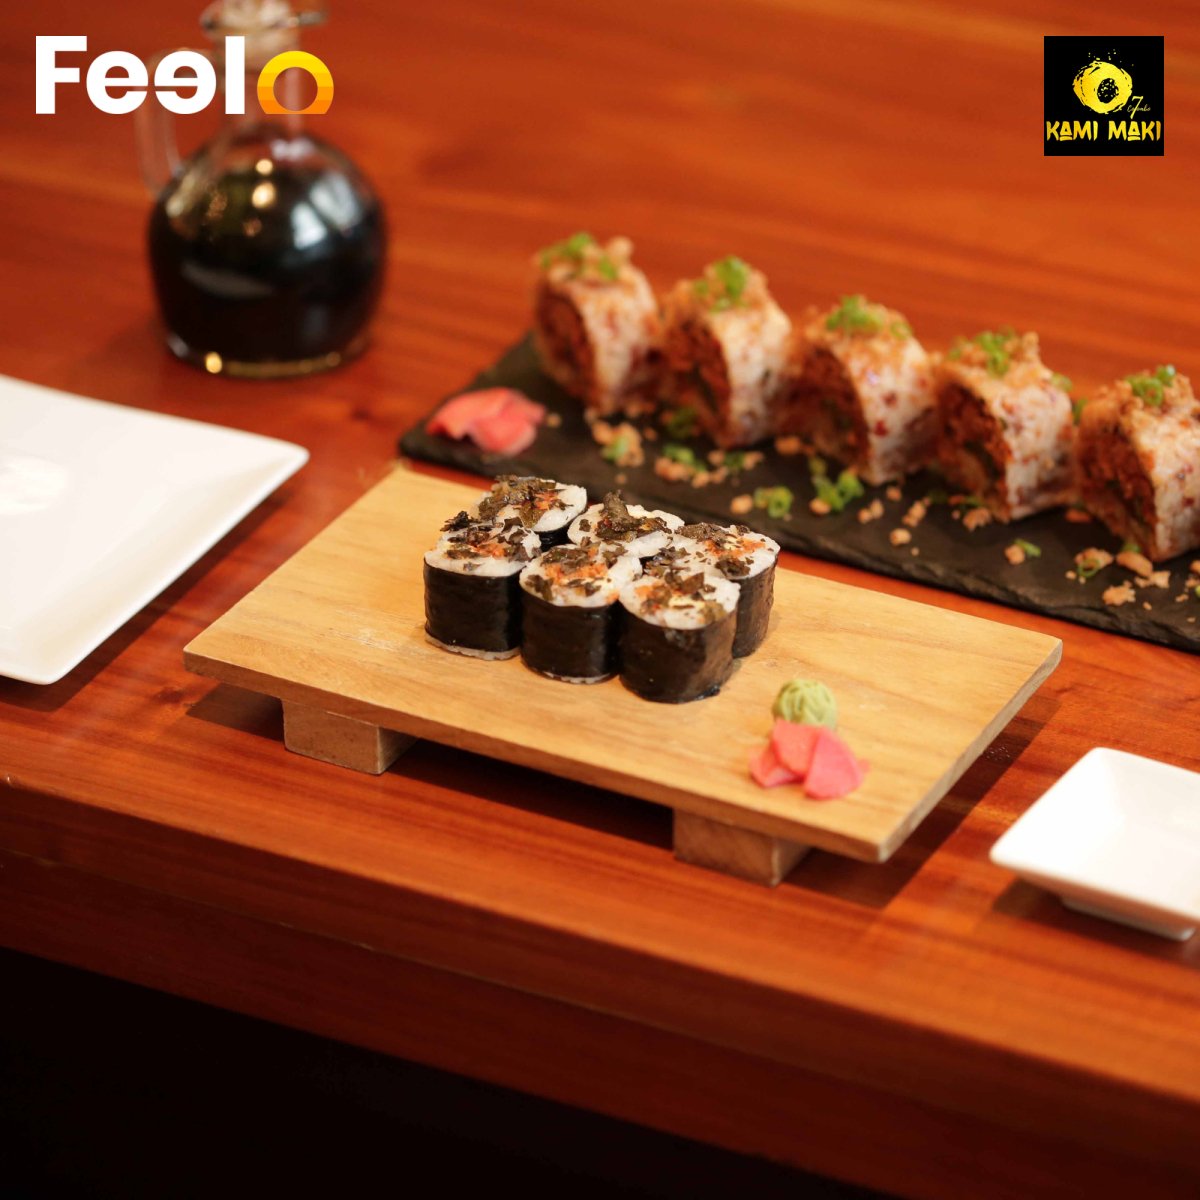 12x authentic Sushi pieces: Choose from Spicy Crab Salad, Avocado & Bell Pepper, or Teriyaki Chicken Rolls - Kami Maki, Colombo 07 | Feelo